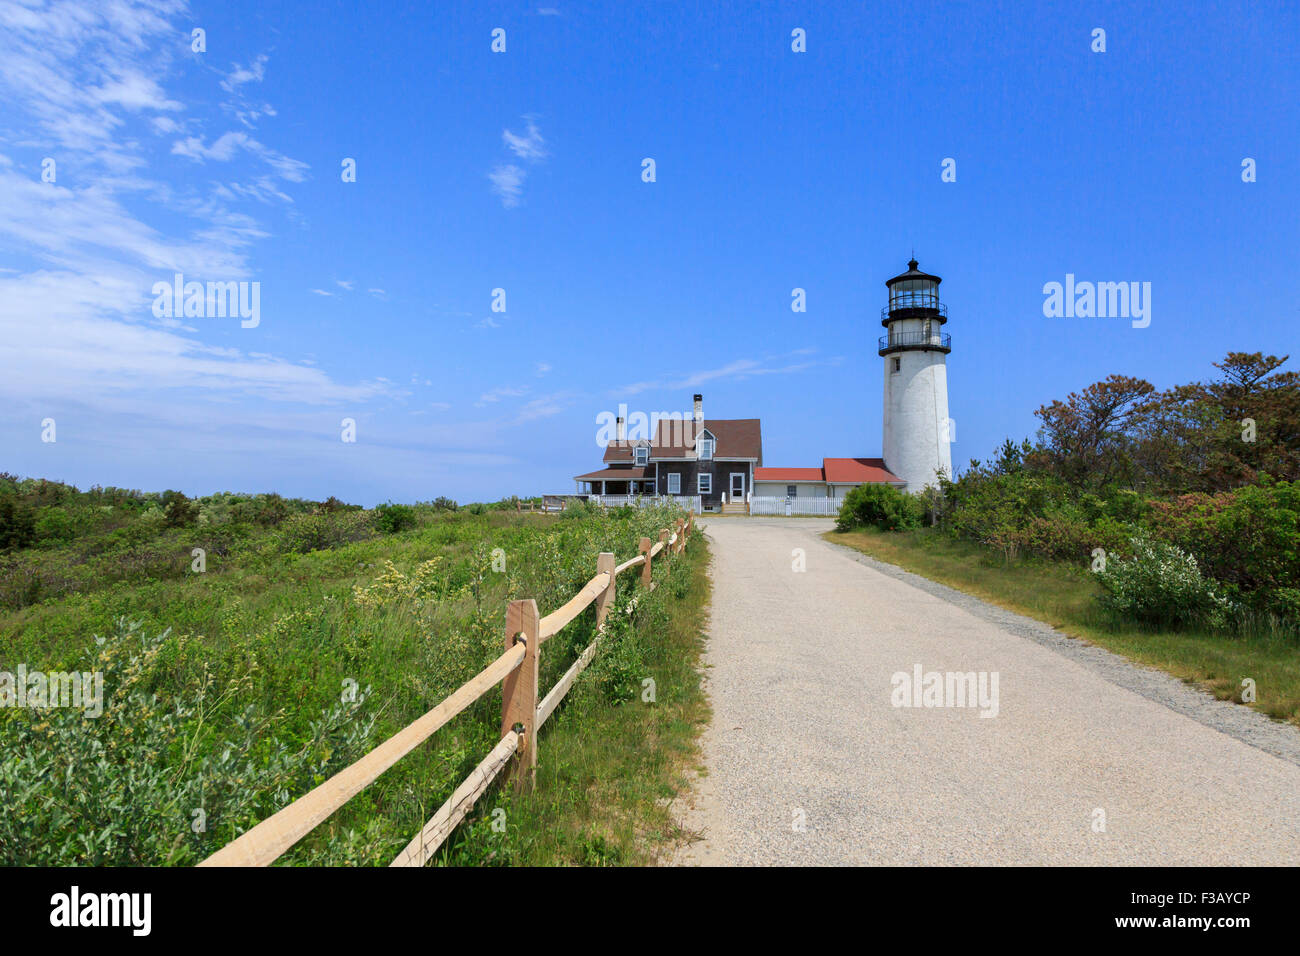 The Highland Light (previously known as Cape Cod Light) North Truro, Massachusetts oldest and tallest lighthouse on Cape Cod Stock Photo